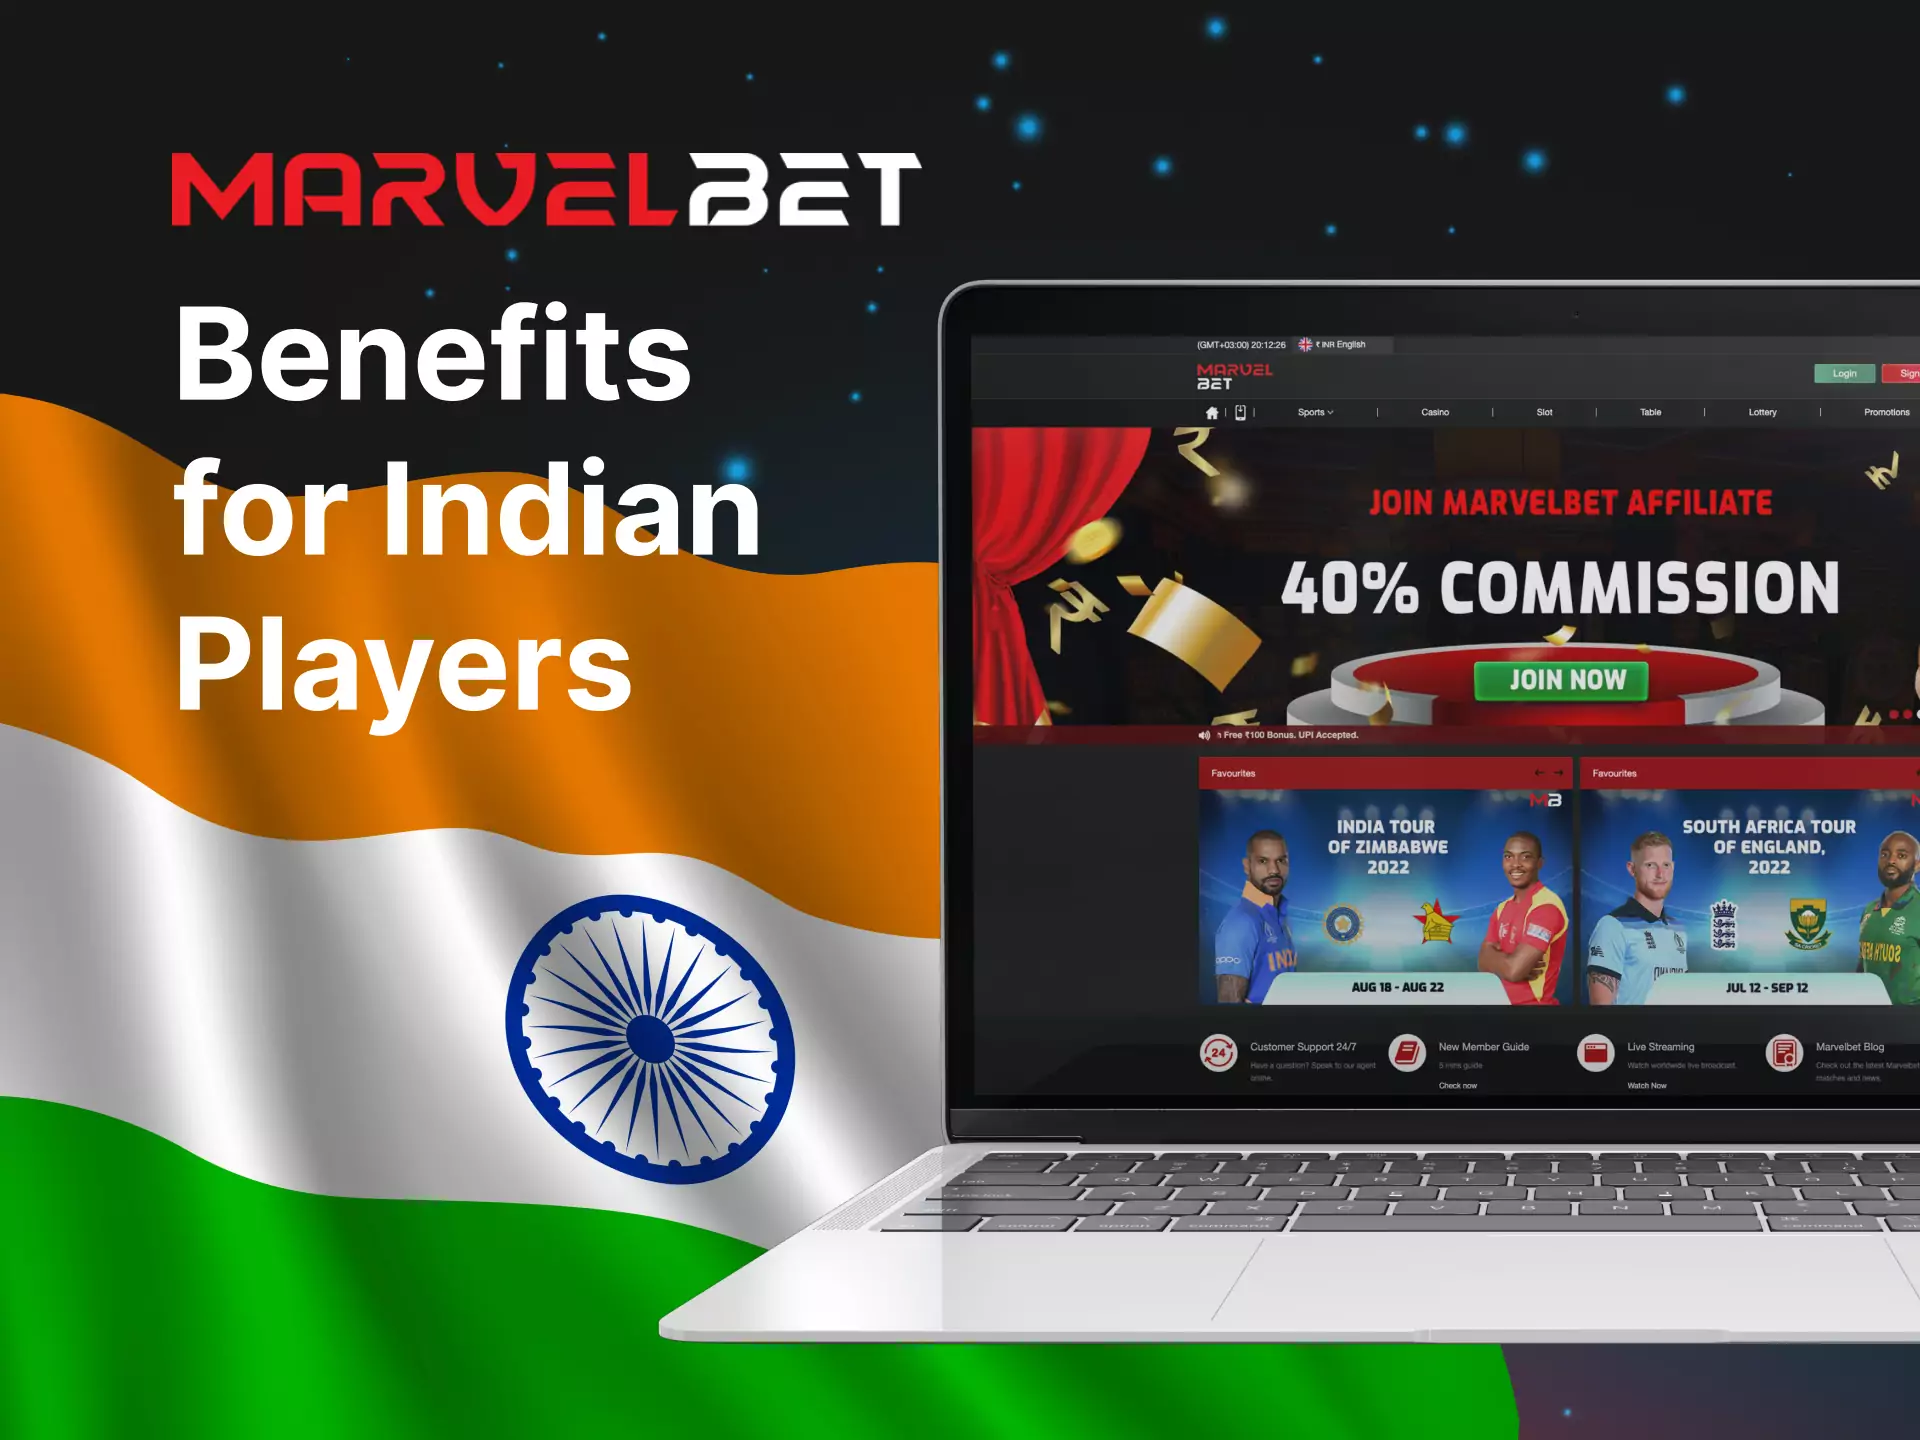 Indian users have special benefits on the Marvelbet website like using Indian popular payment methods.